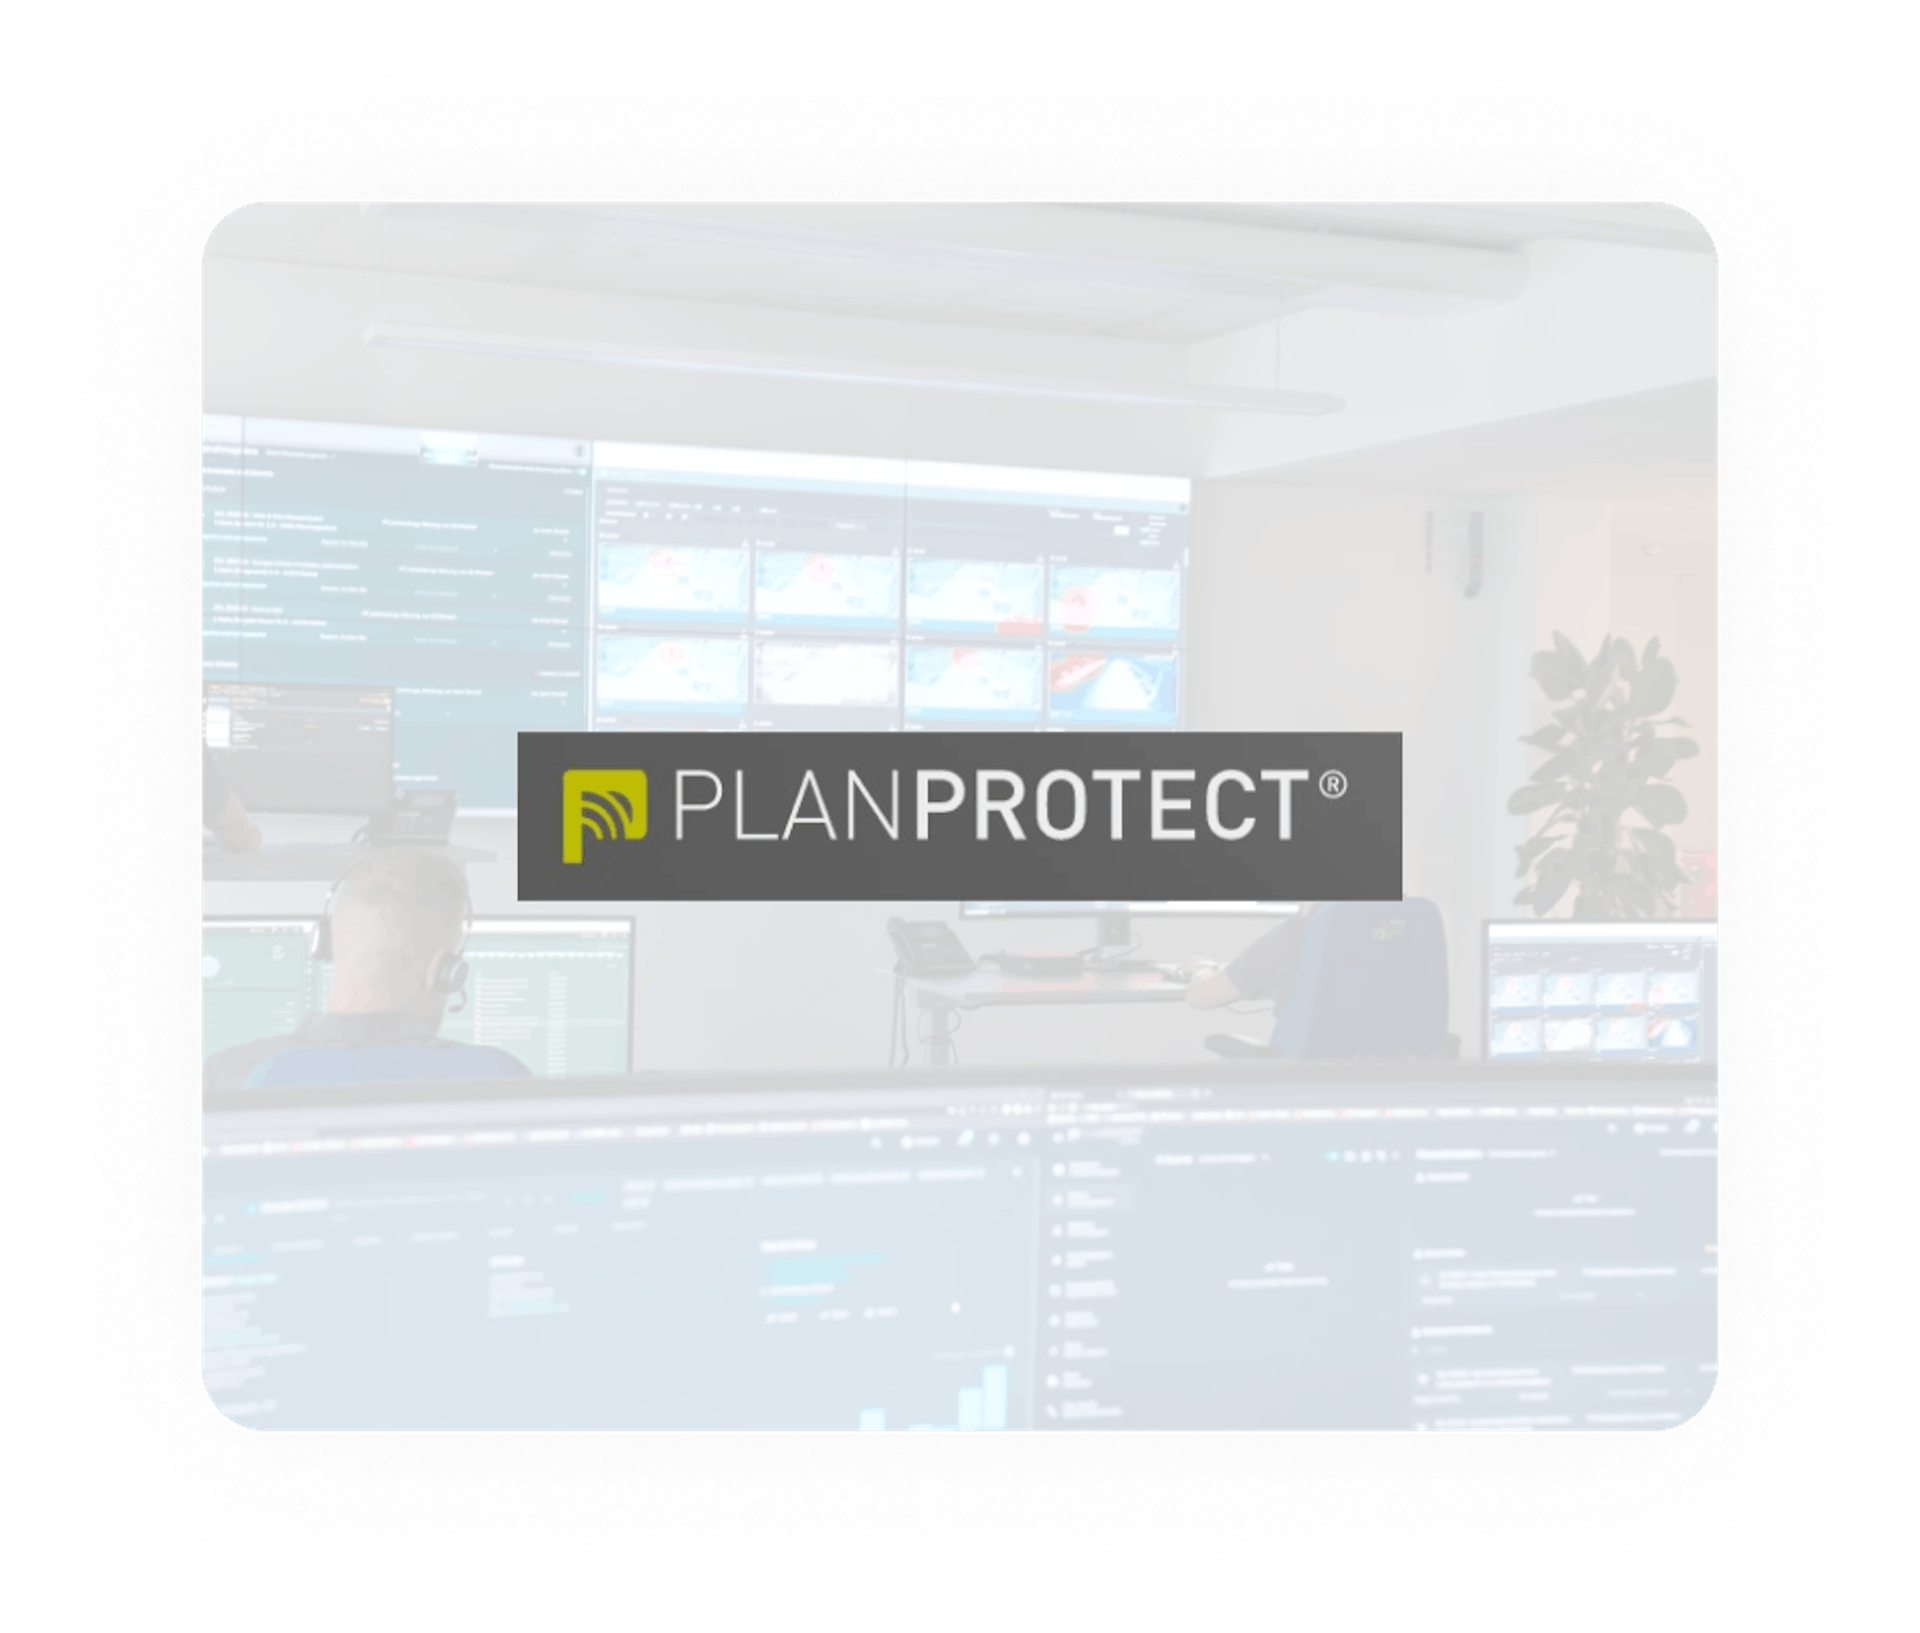 PLANPROTECT logo on semi-transparent background with representation of PLANPROTECT headquarters